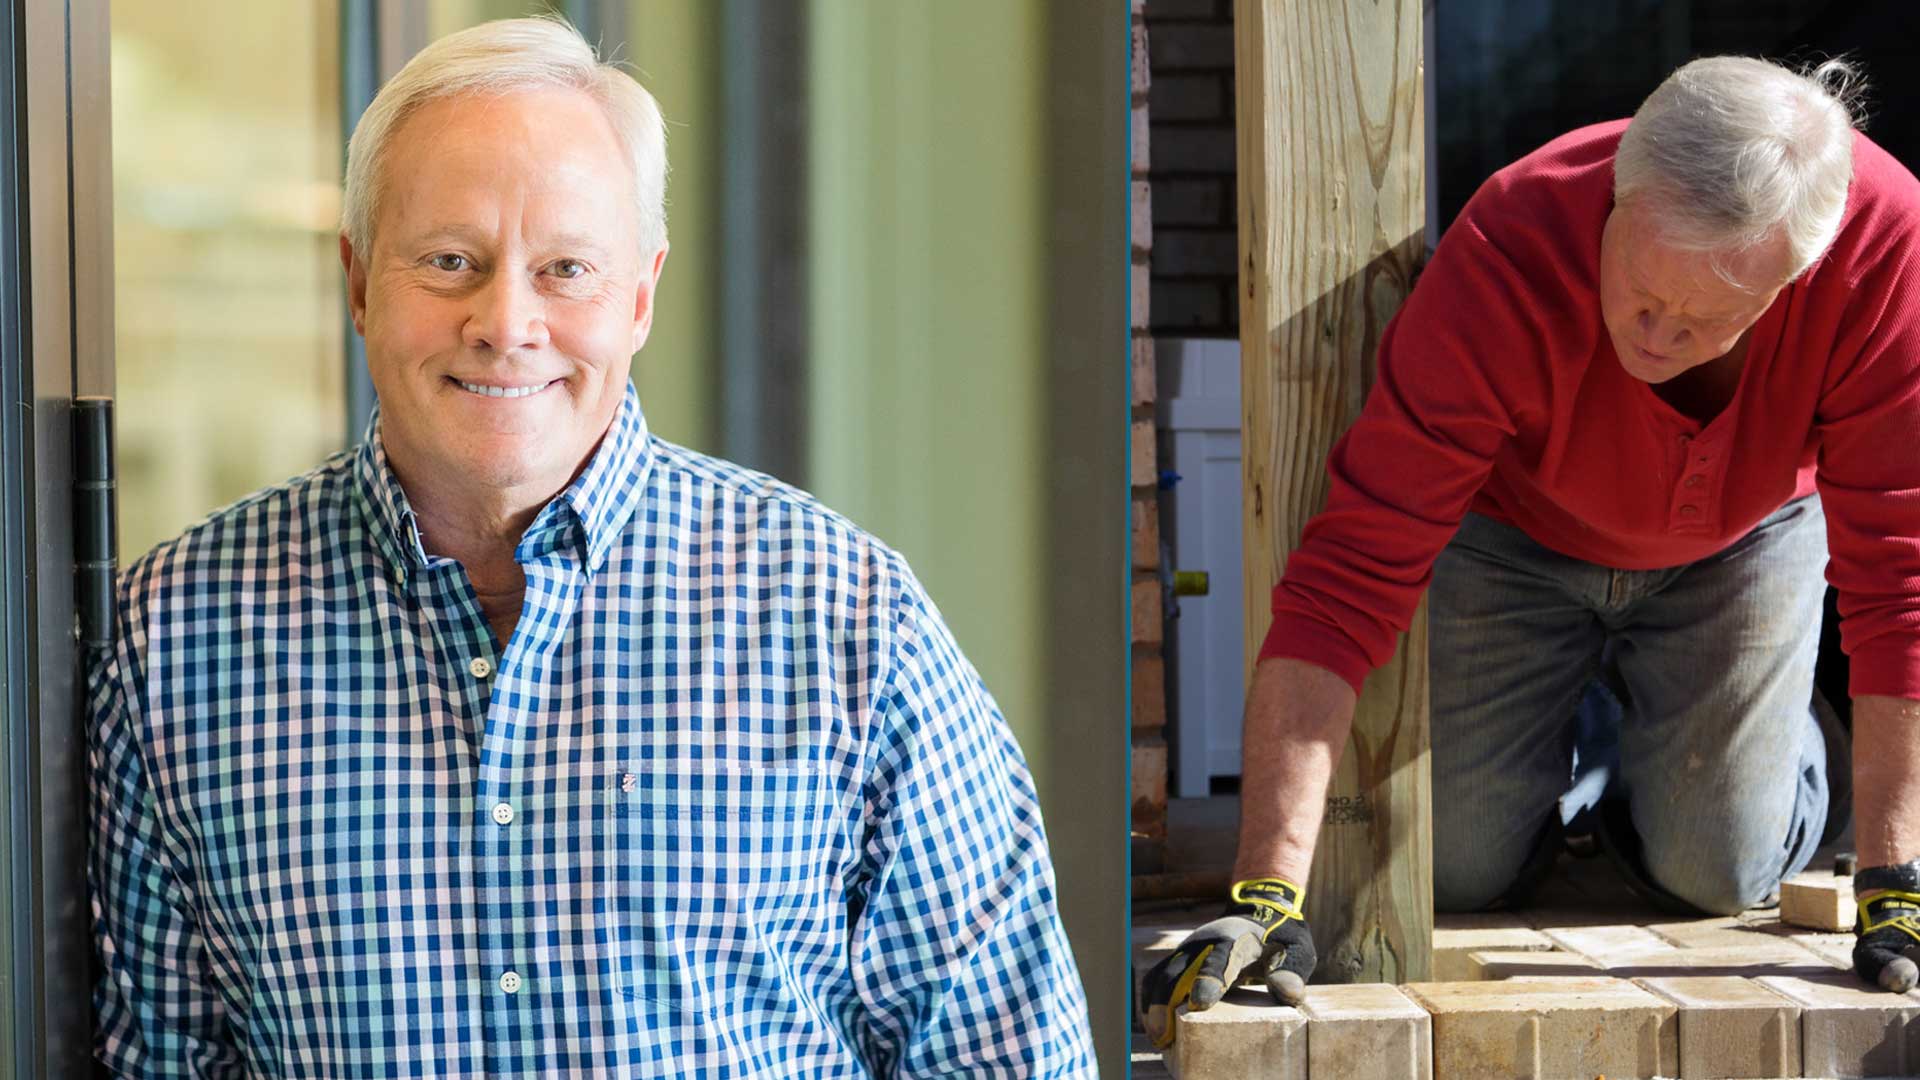 “Today’s Homeowner” host Danny Lipford, seen at left, looking at the camera while leaning against a column in an outdoor kitchen, and seen at right, laying pavers on a patio.